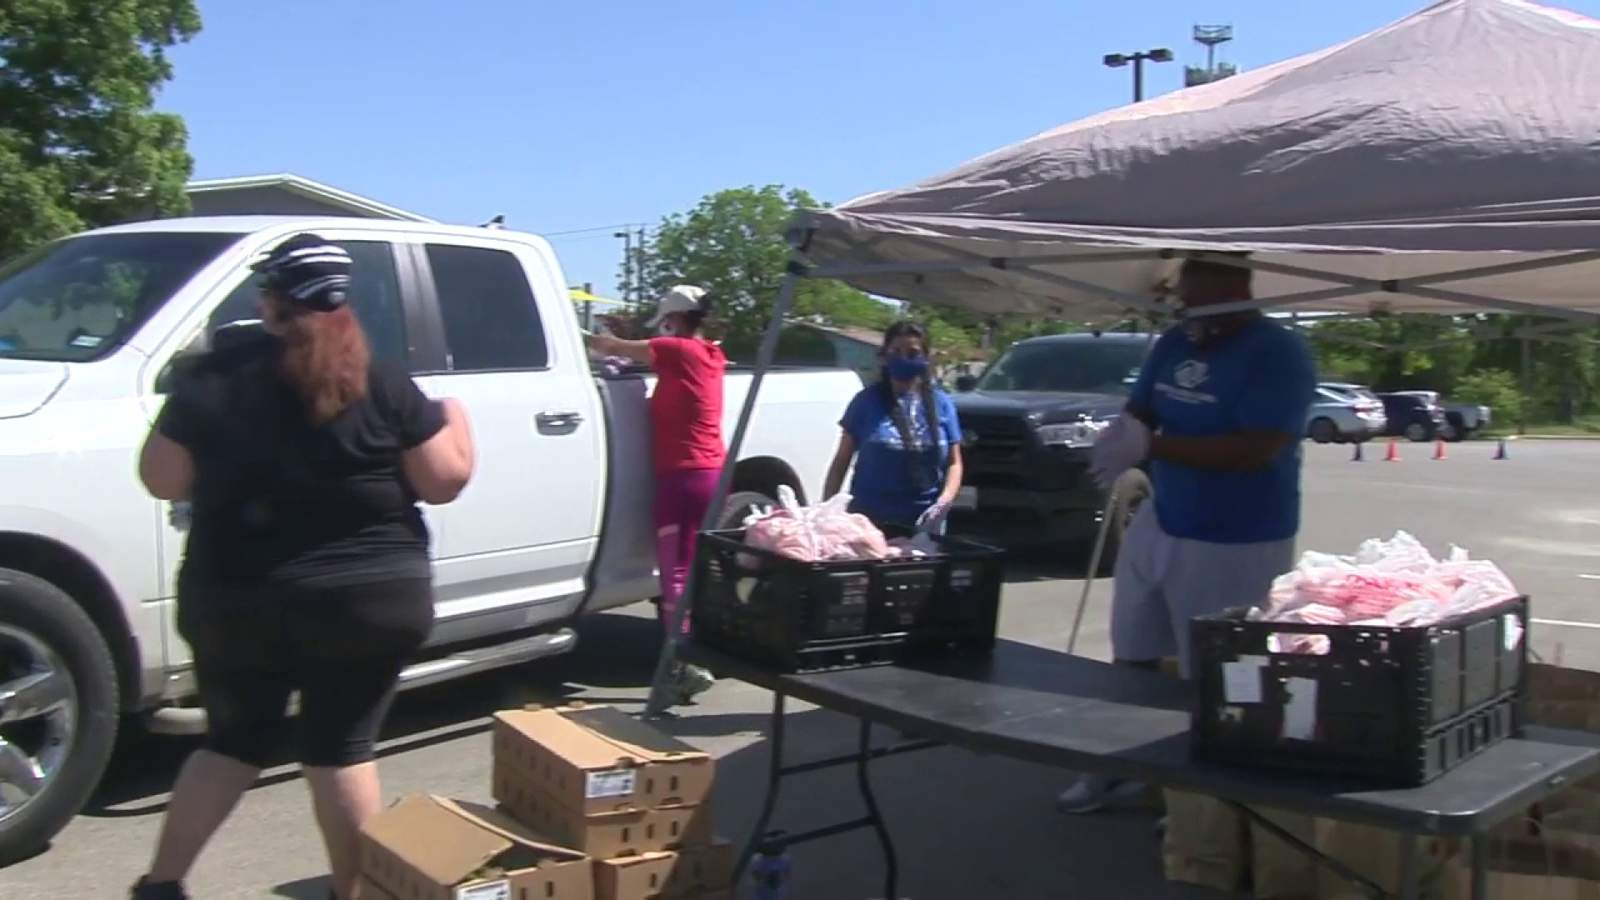 Boys & Girls Clubs donate food to those in need during coronavirus pandemic